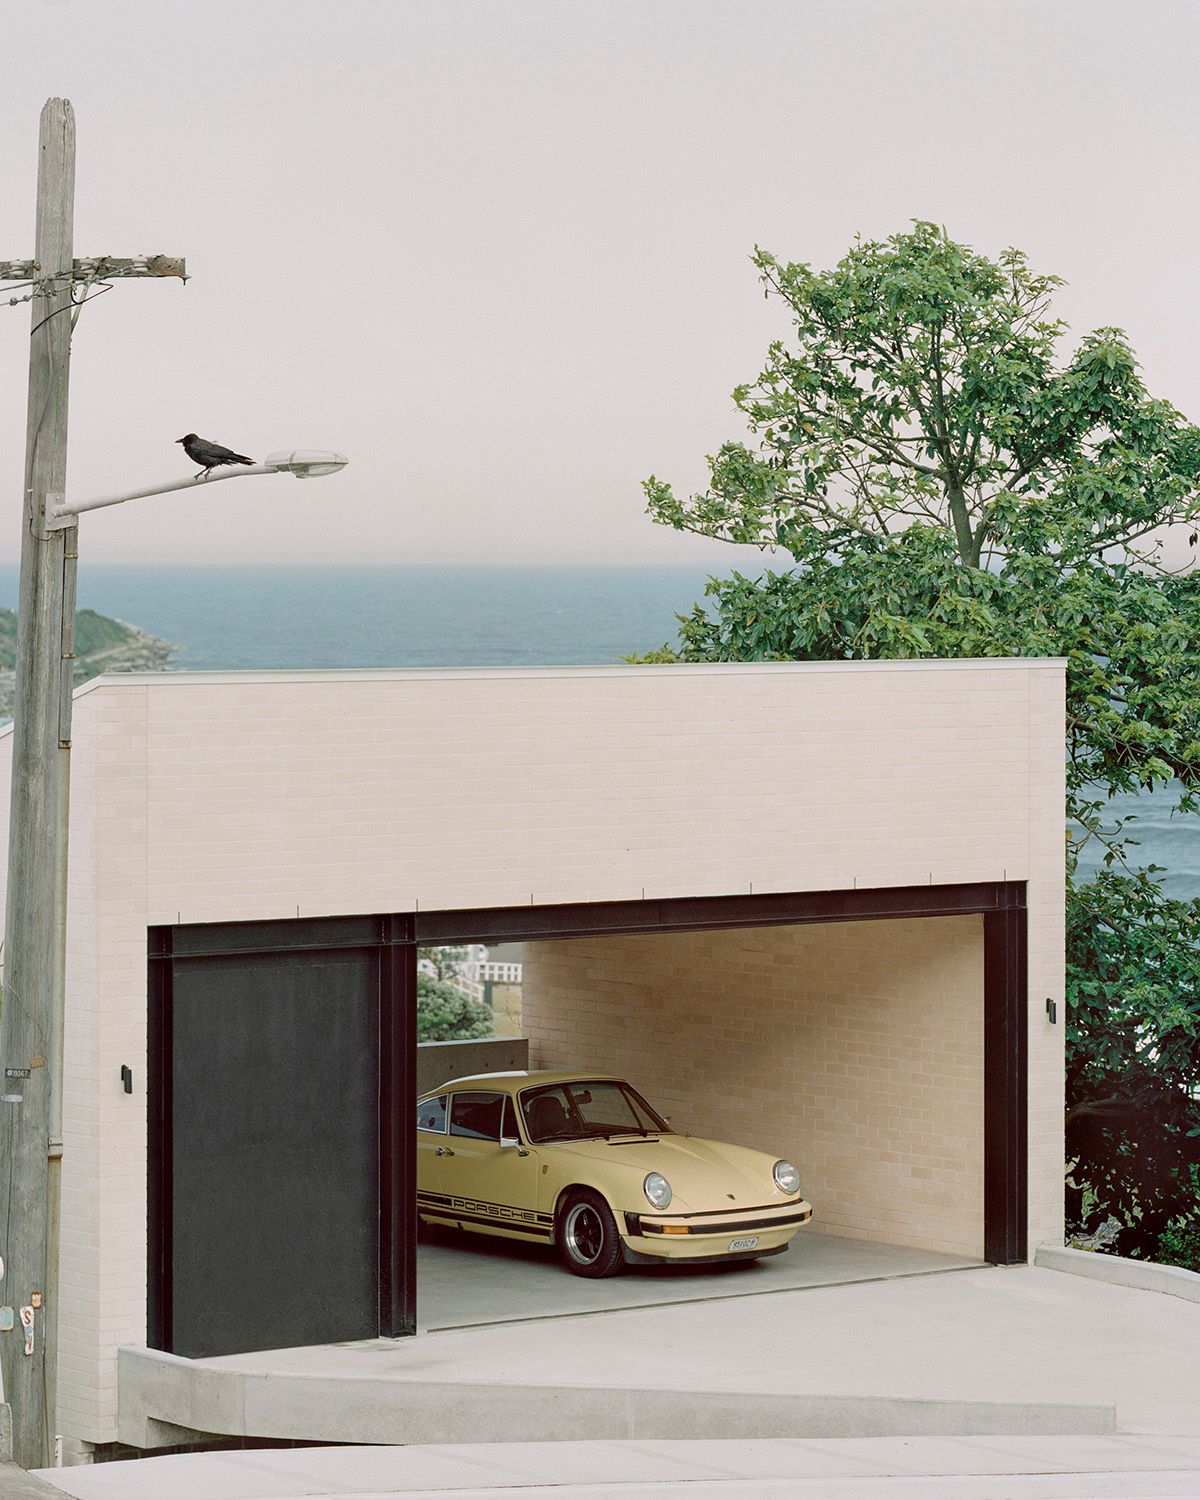 Bronte House by Tribe Studio Architects showing brick garage with a vintage yellow car parked in it